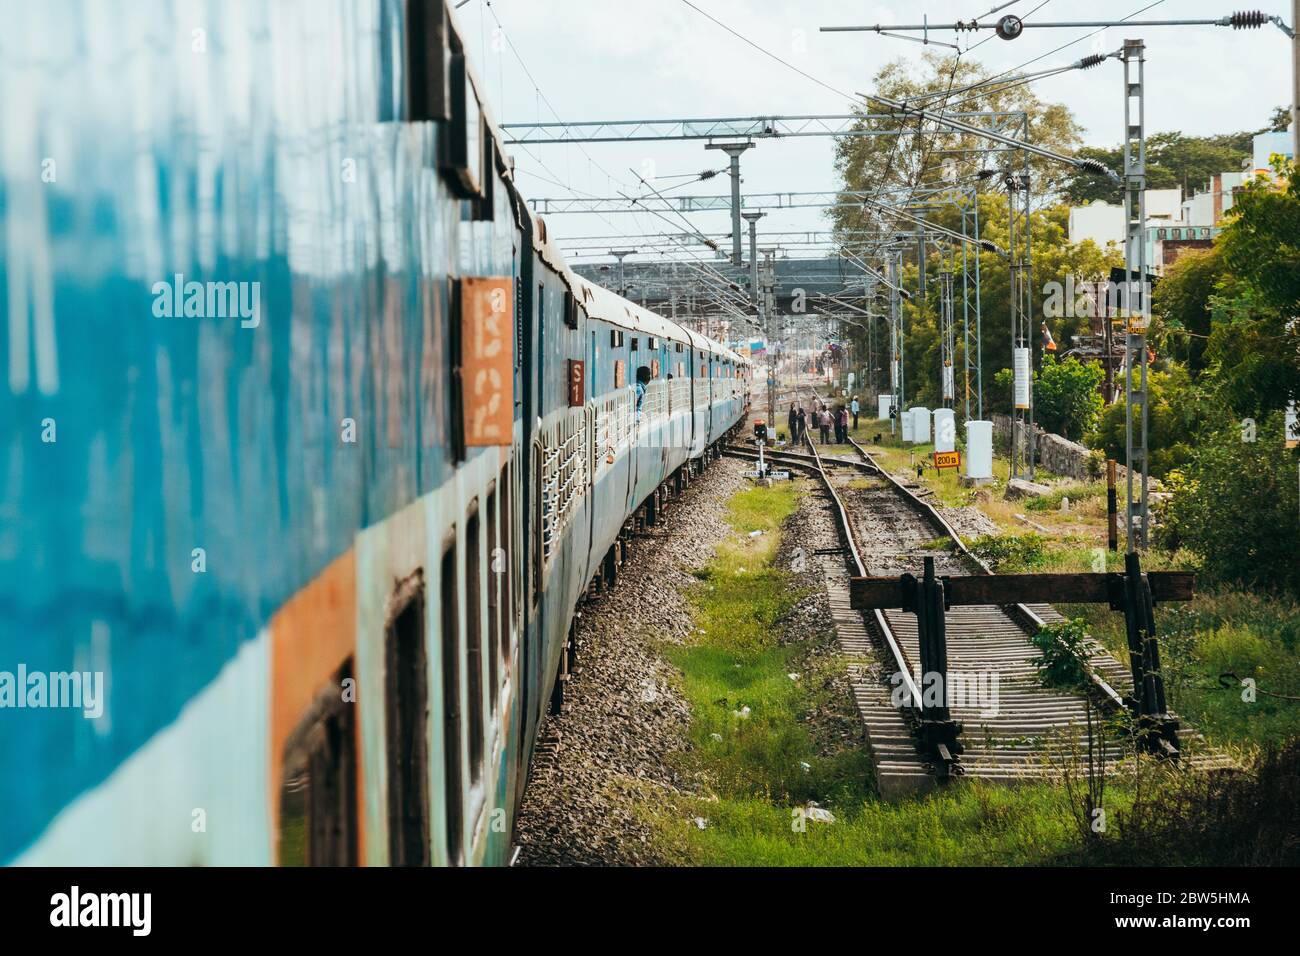 The view of the carriages from the train door approaching Madurai, Tamil Nadu, India Stock Photo